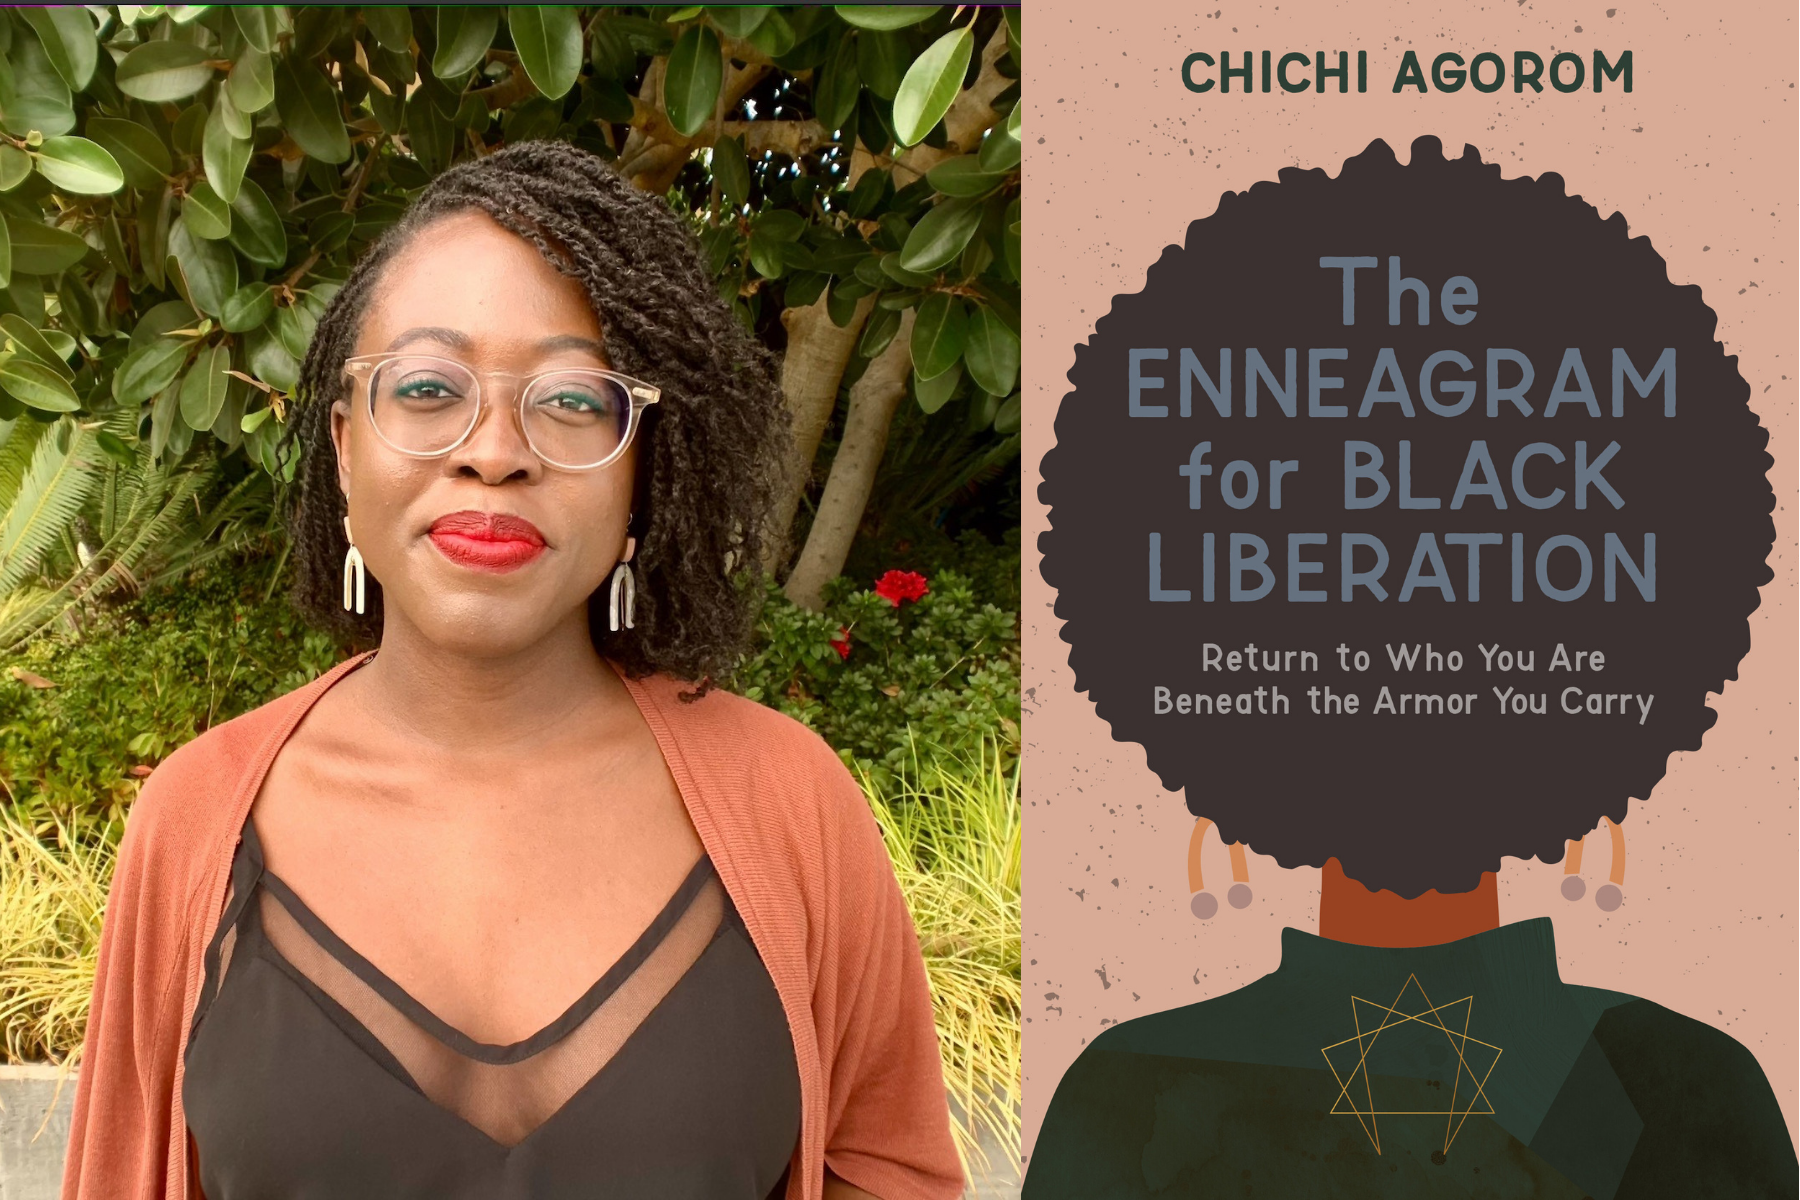 A photograph of author Chichi Agorom, a Black woman wearing a rust-colored cardigan and black top in front of green folliage, and the cover of the book The Enneagram for Black Liberation